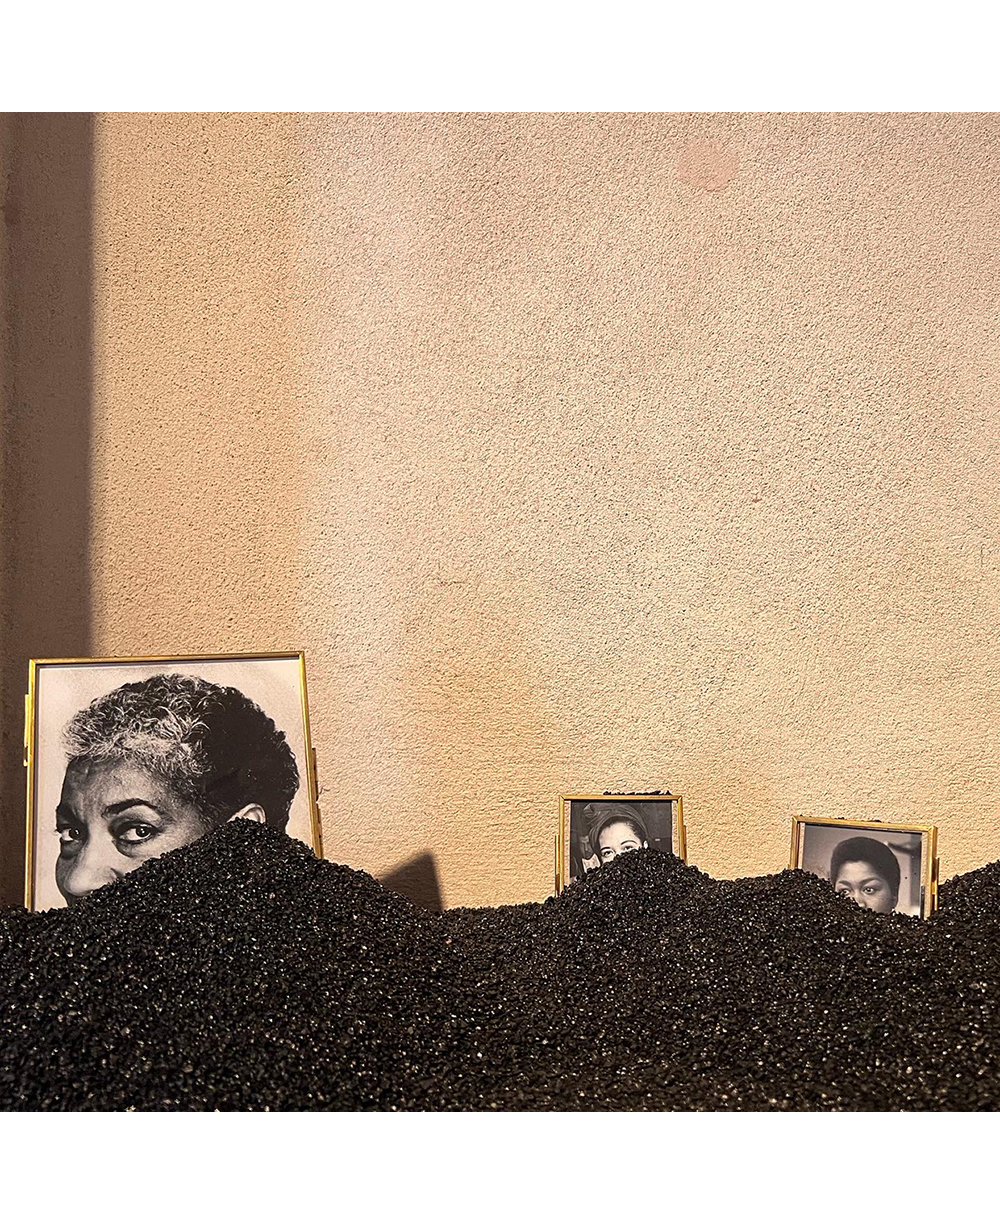 Black sand partially covers three framed photos of women